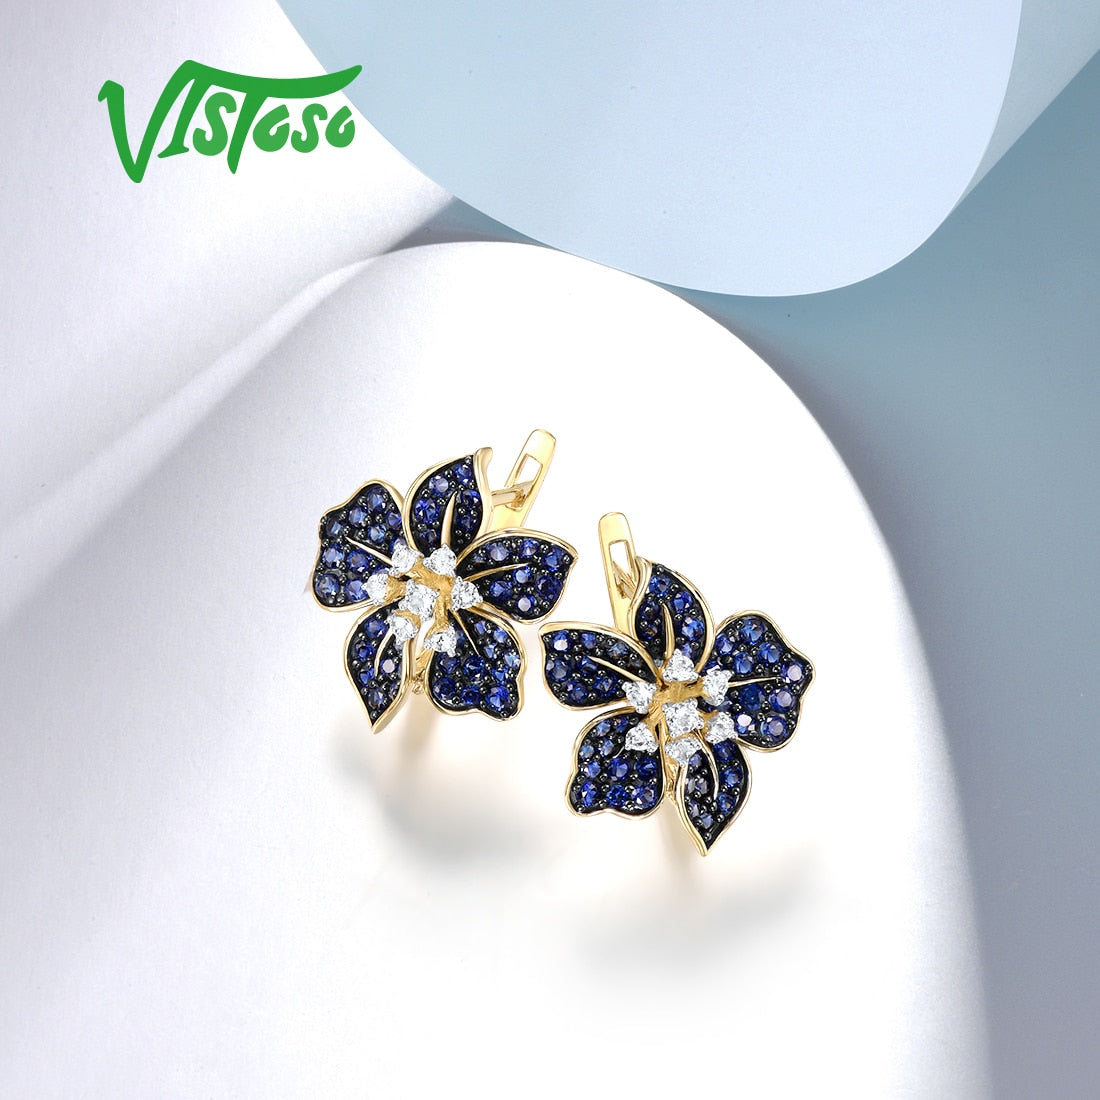 Gold Earrings For Women - Created Sapphire White Topaz Blue Lily Flower Fine Jewelry